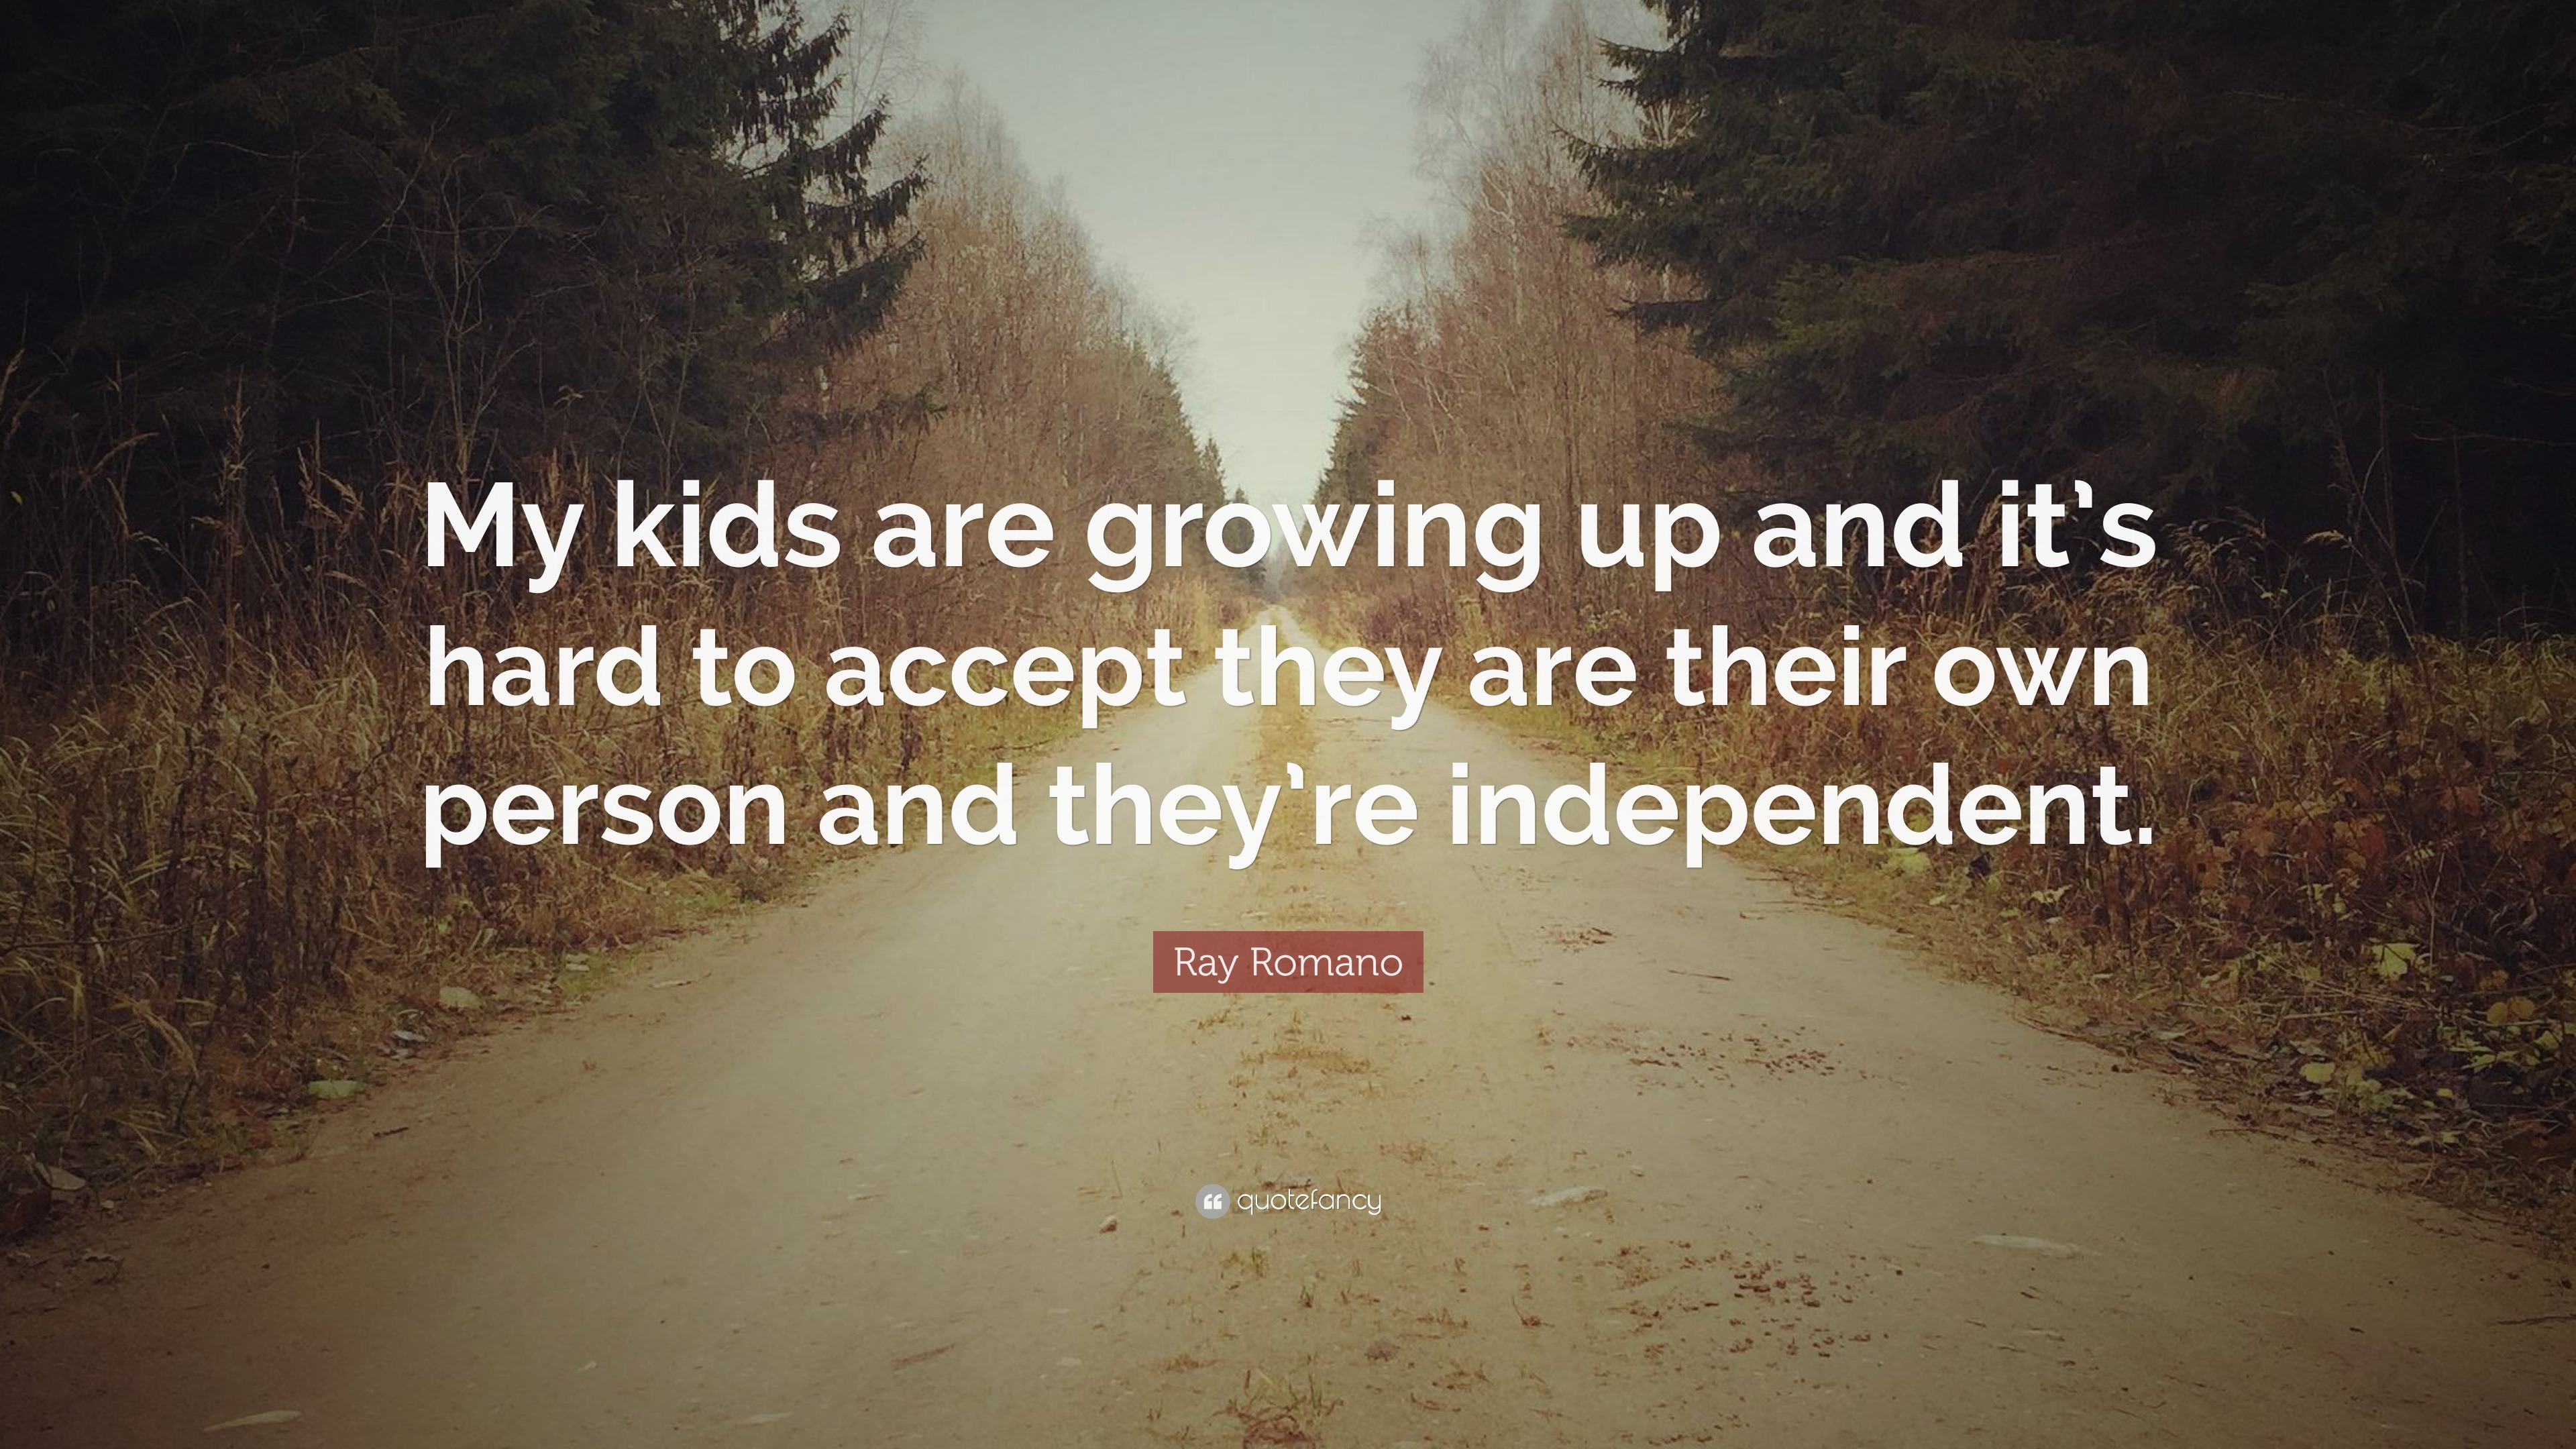 Ray Romano Quote “My kids are growing up and it's hard to accept ...